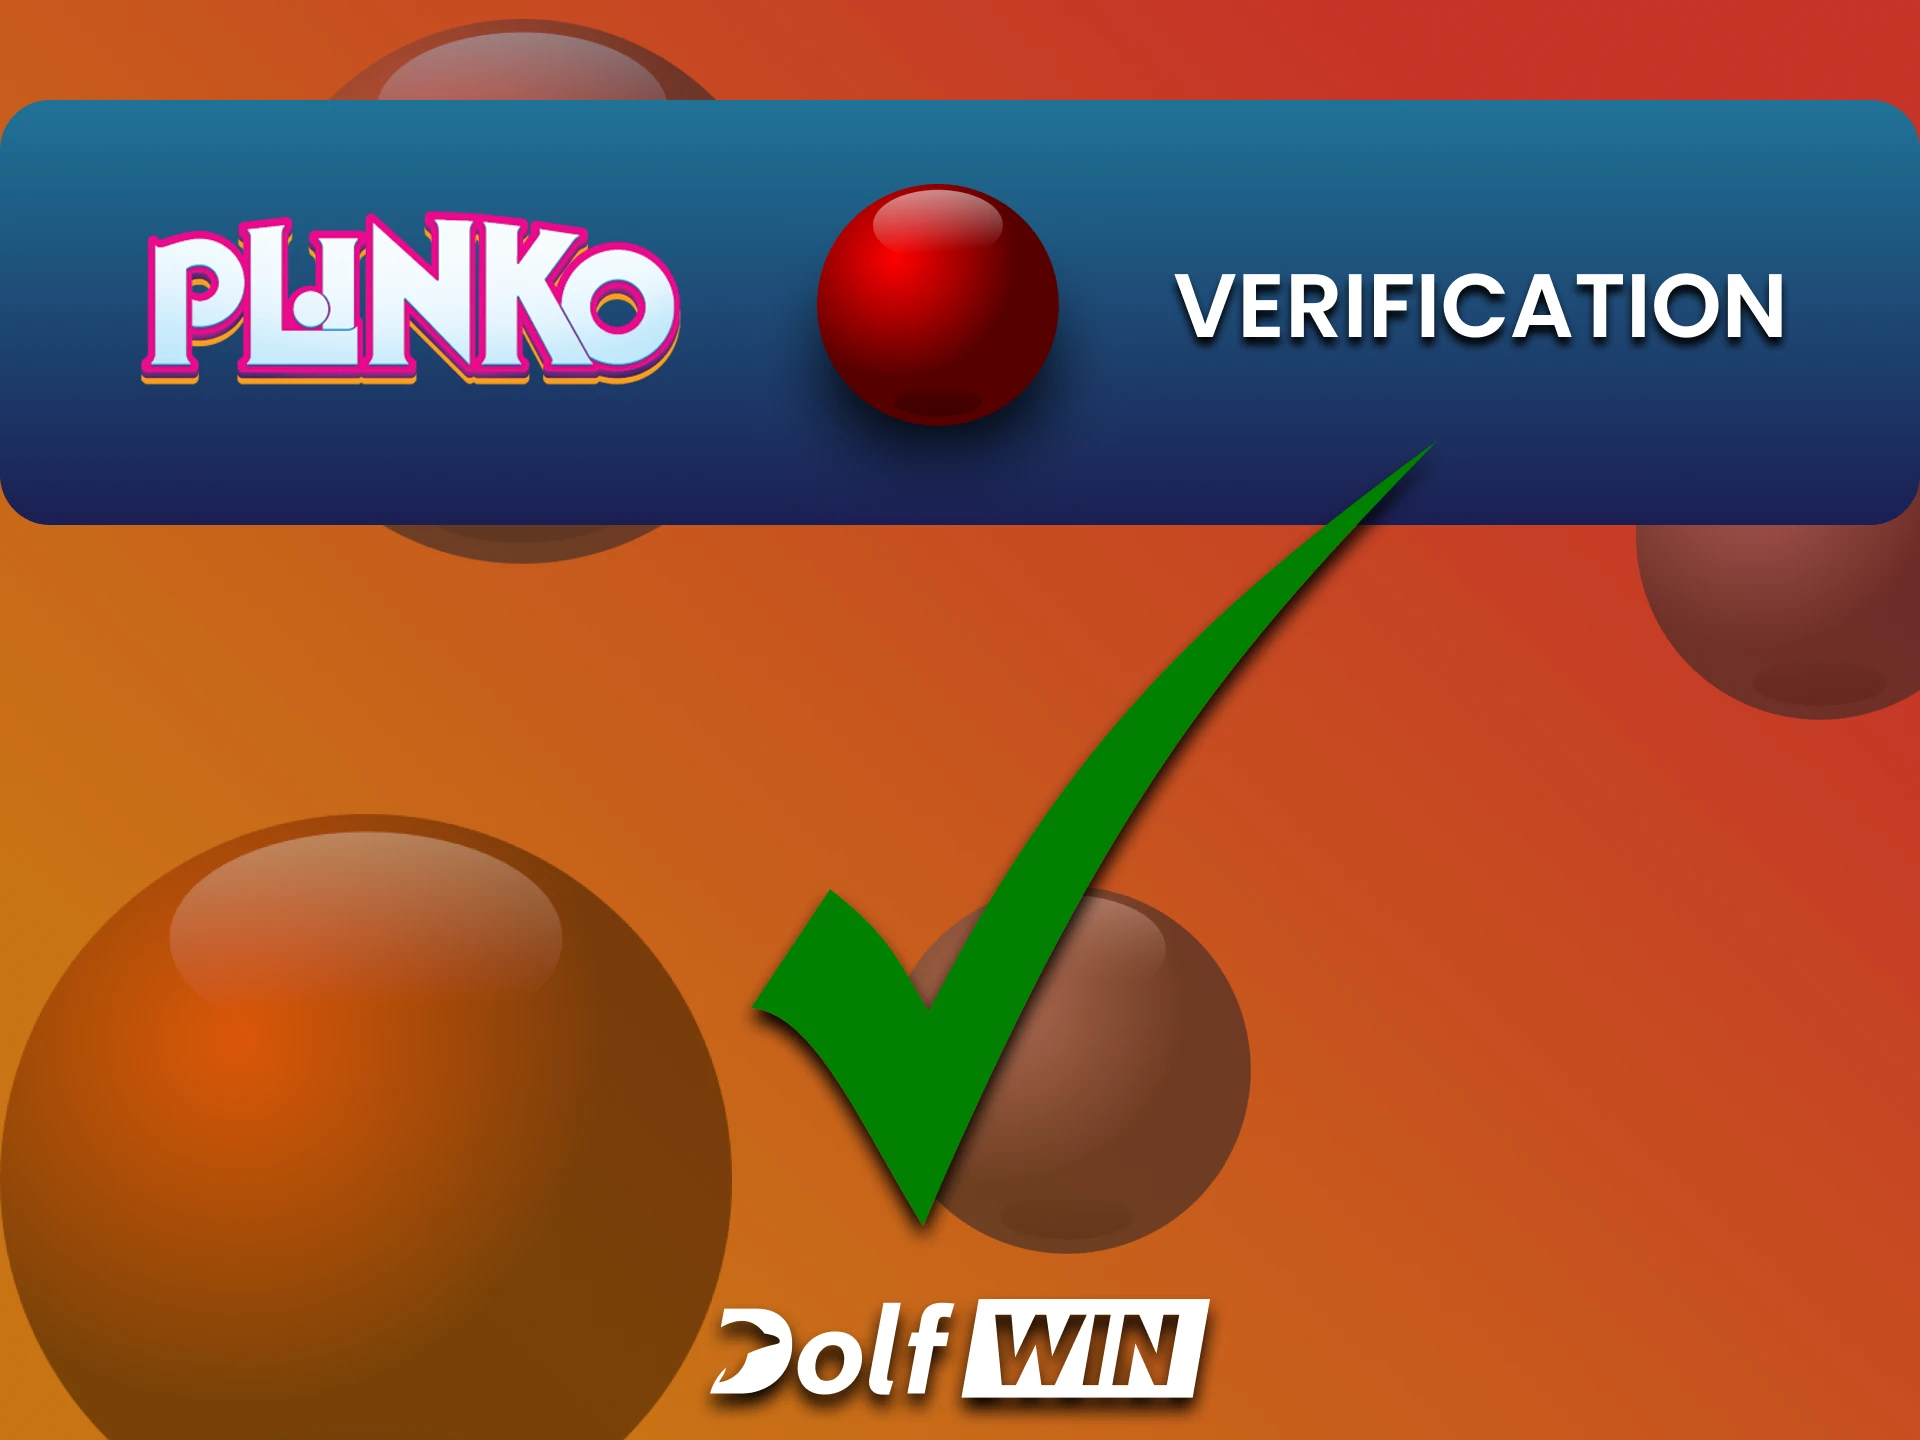 Fill out all the information on the Dolfwin website to play Plinko.